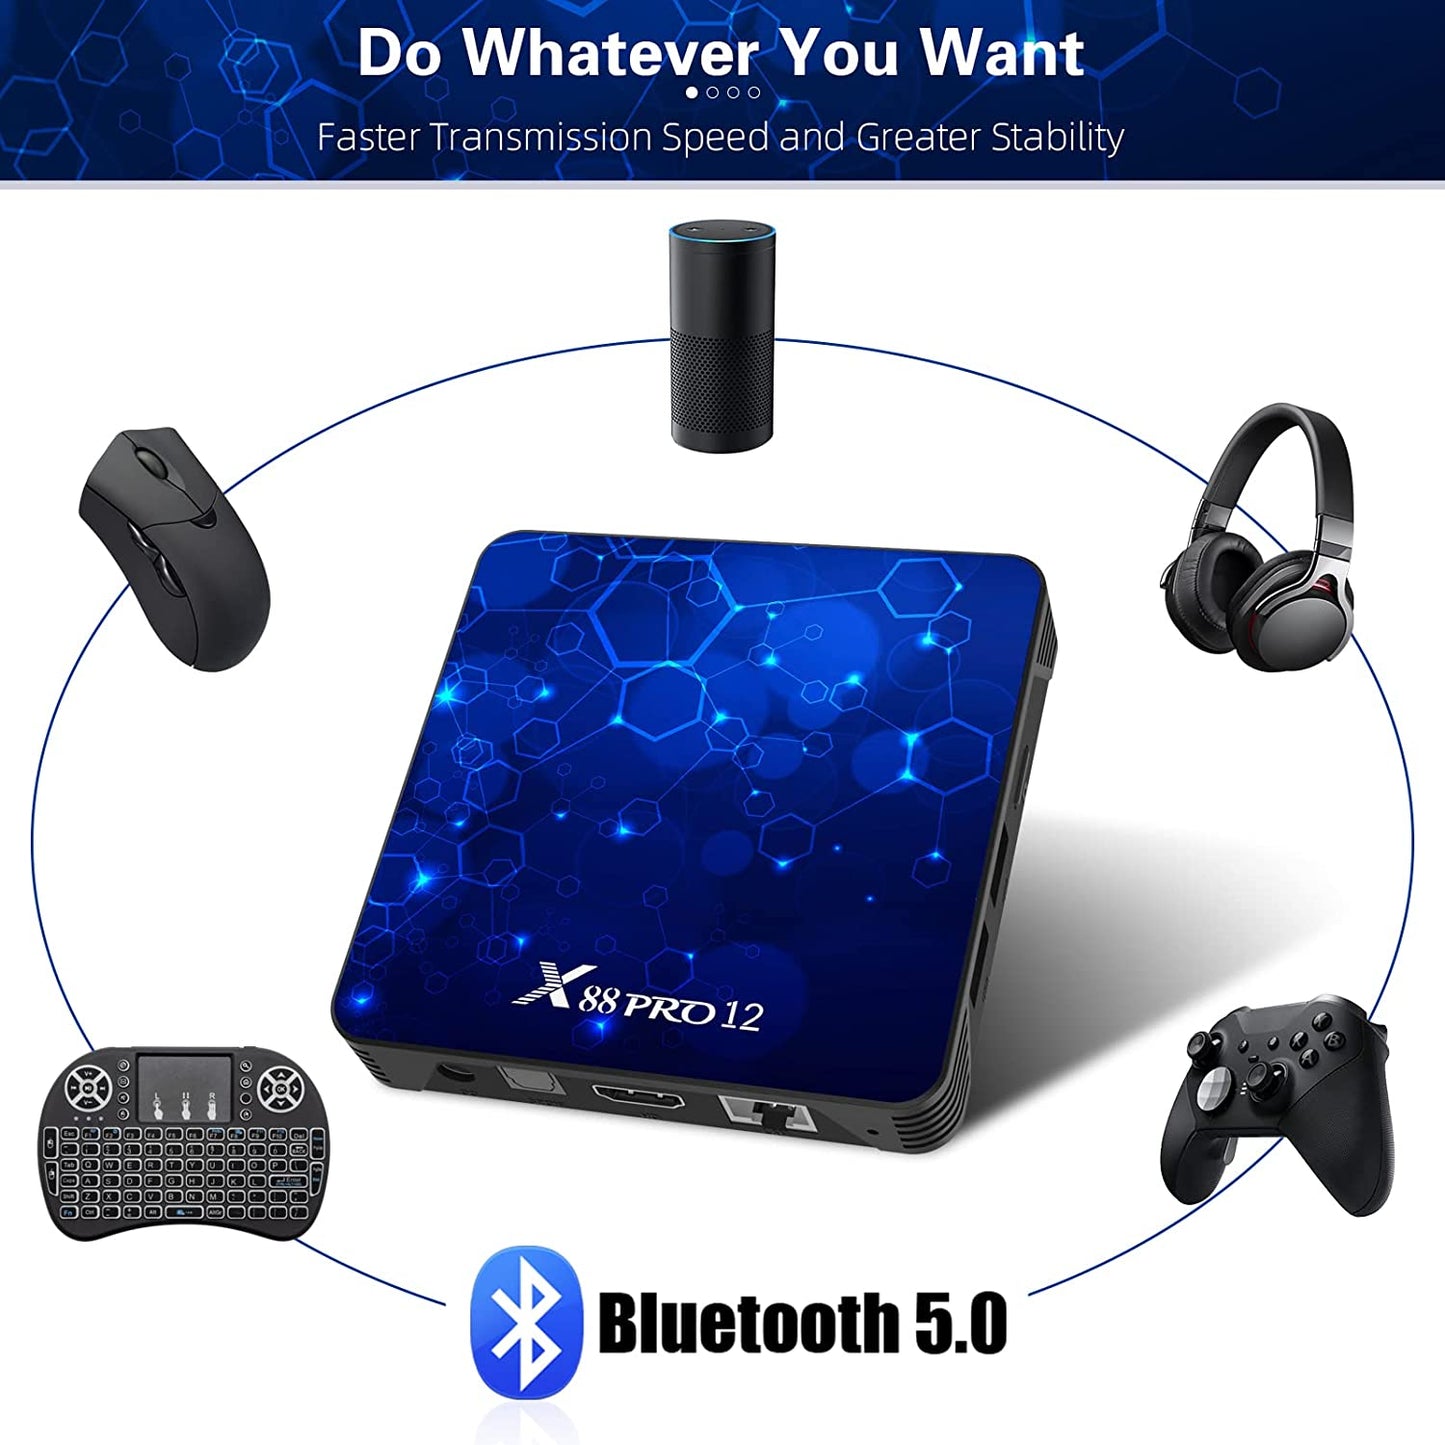 Android 12.0 TV Box, X88 PRO 12 Android TV Box 4GB RAM 32GB ROM RK3318 Quad-Core 64bit Support 4K 3D HD H.265 Ethernet 2.4G/5G Dual-Band WiFi BT5.0 Smart TV Box